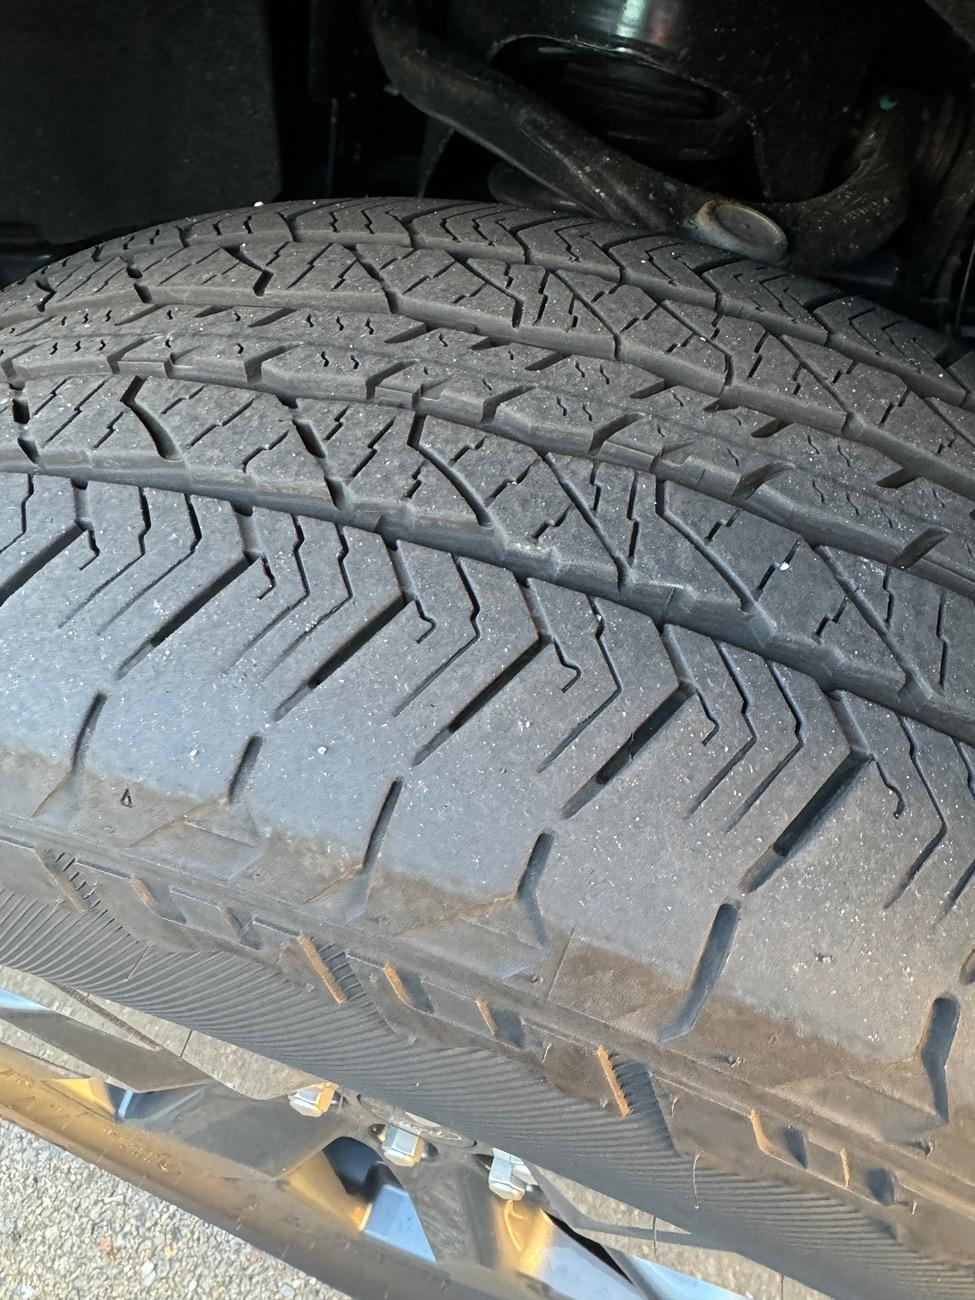 Ford F-150 Lightning Tire issue or alignment -- Anyone else seeing this kind of wear? IMG_0583